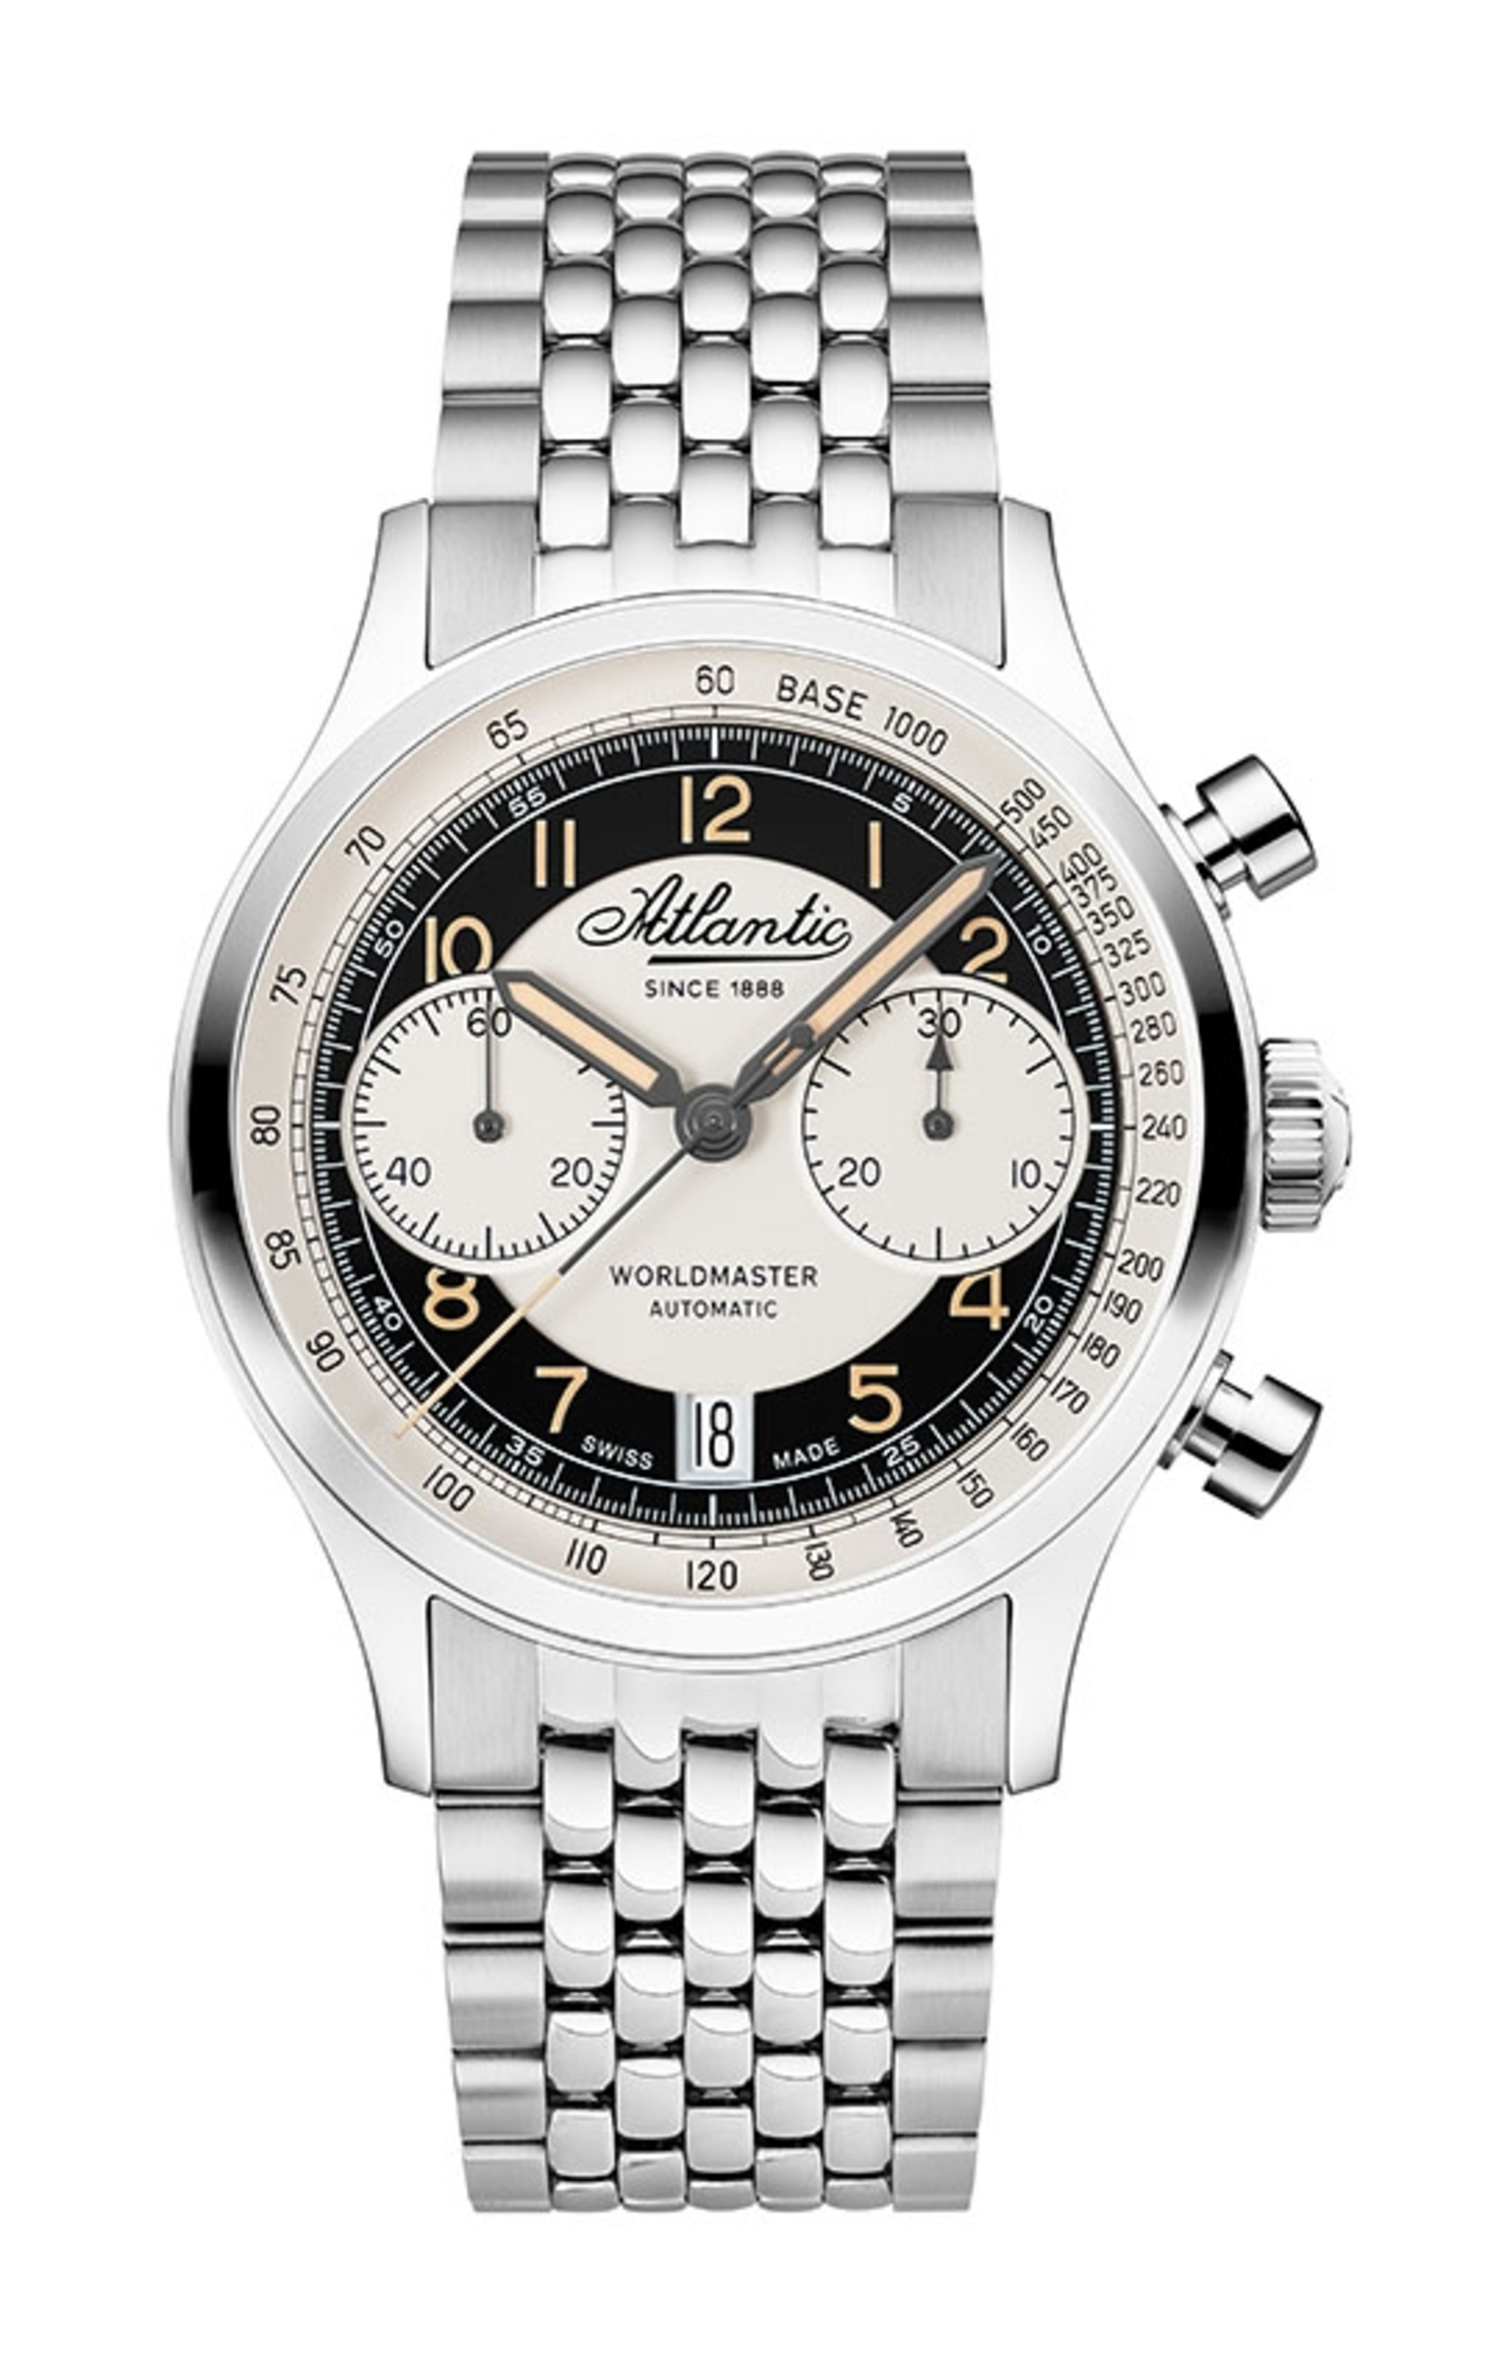 Atlantic Worldmaster Bicompax Automatic Dual Color with stainless steel bracelet